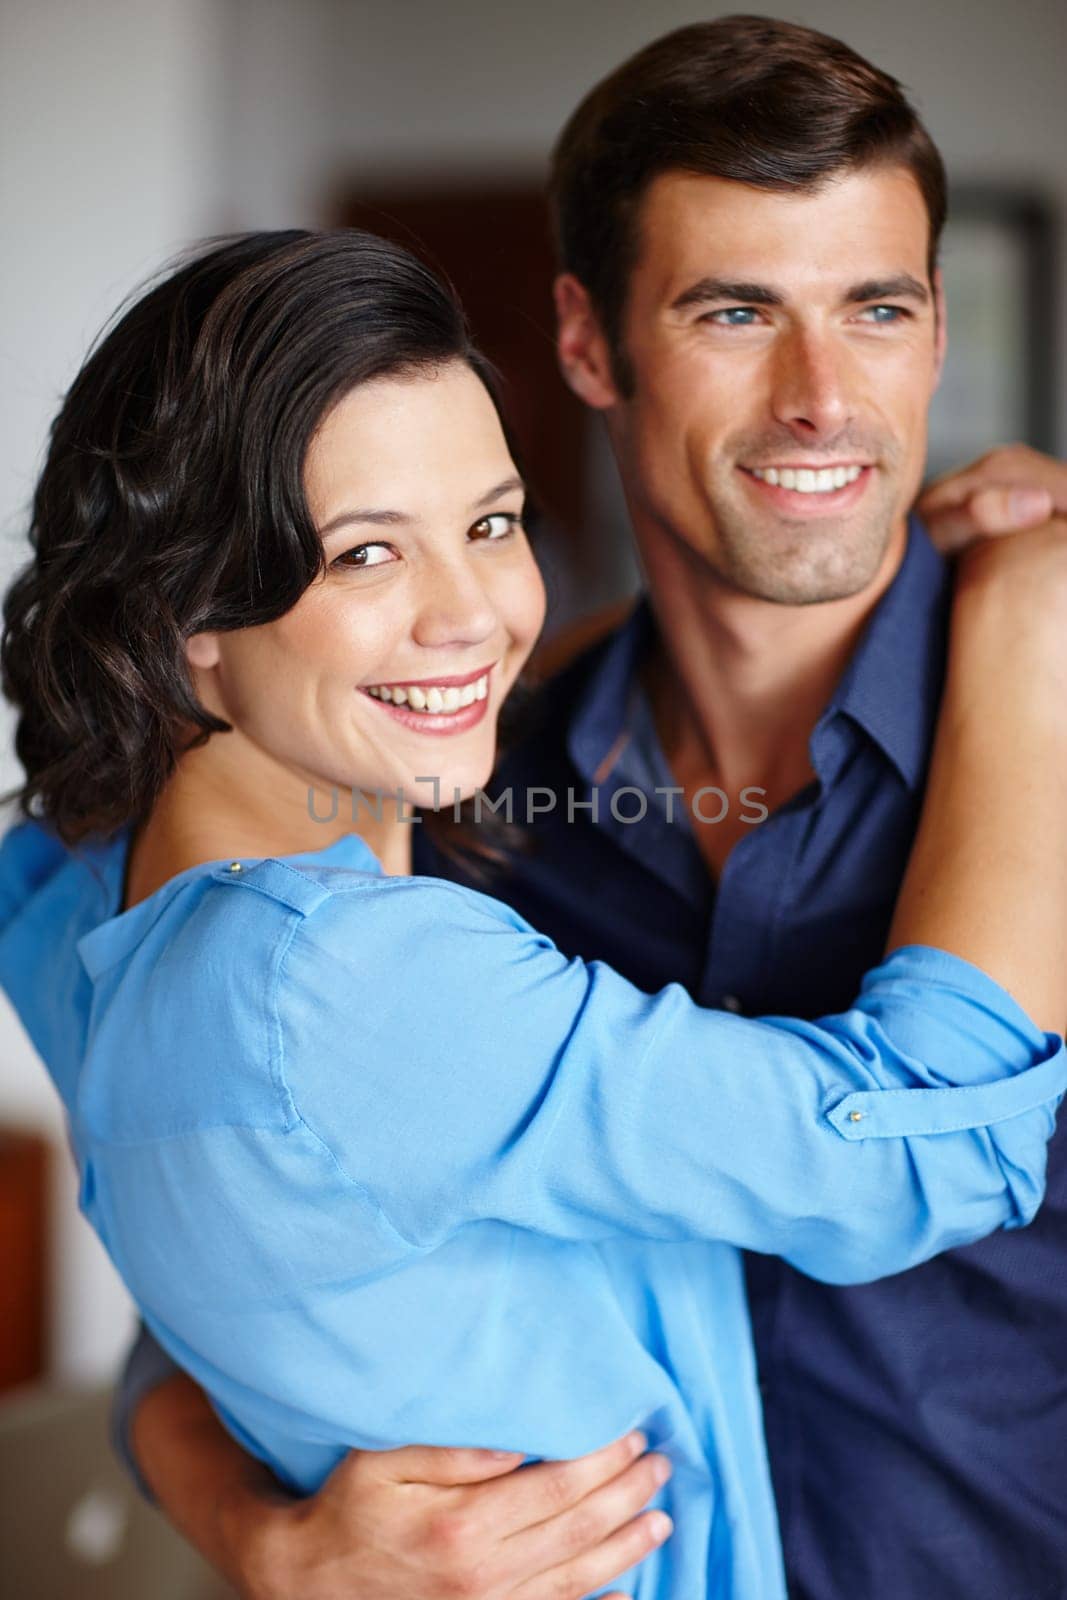 Couple, together and happy hug in portrait for love, romance and memories. Man, woman and intimate embrace for relationship smiling for passion, connection or bonding affectionate and caring.